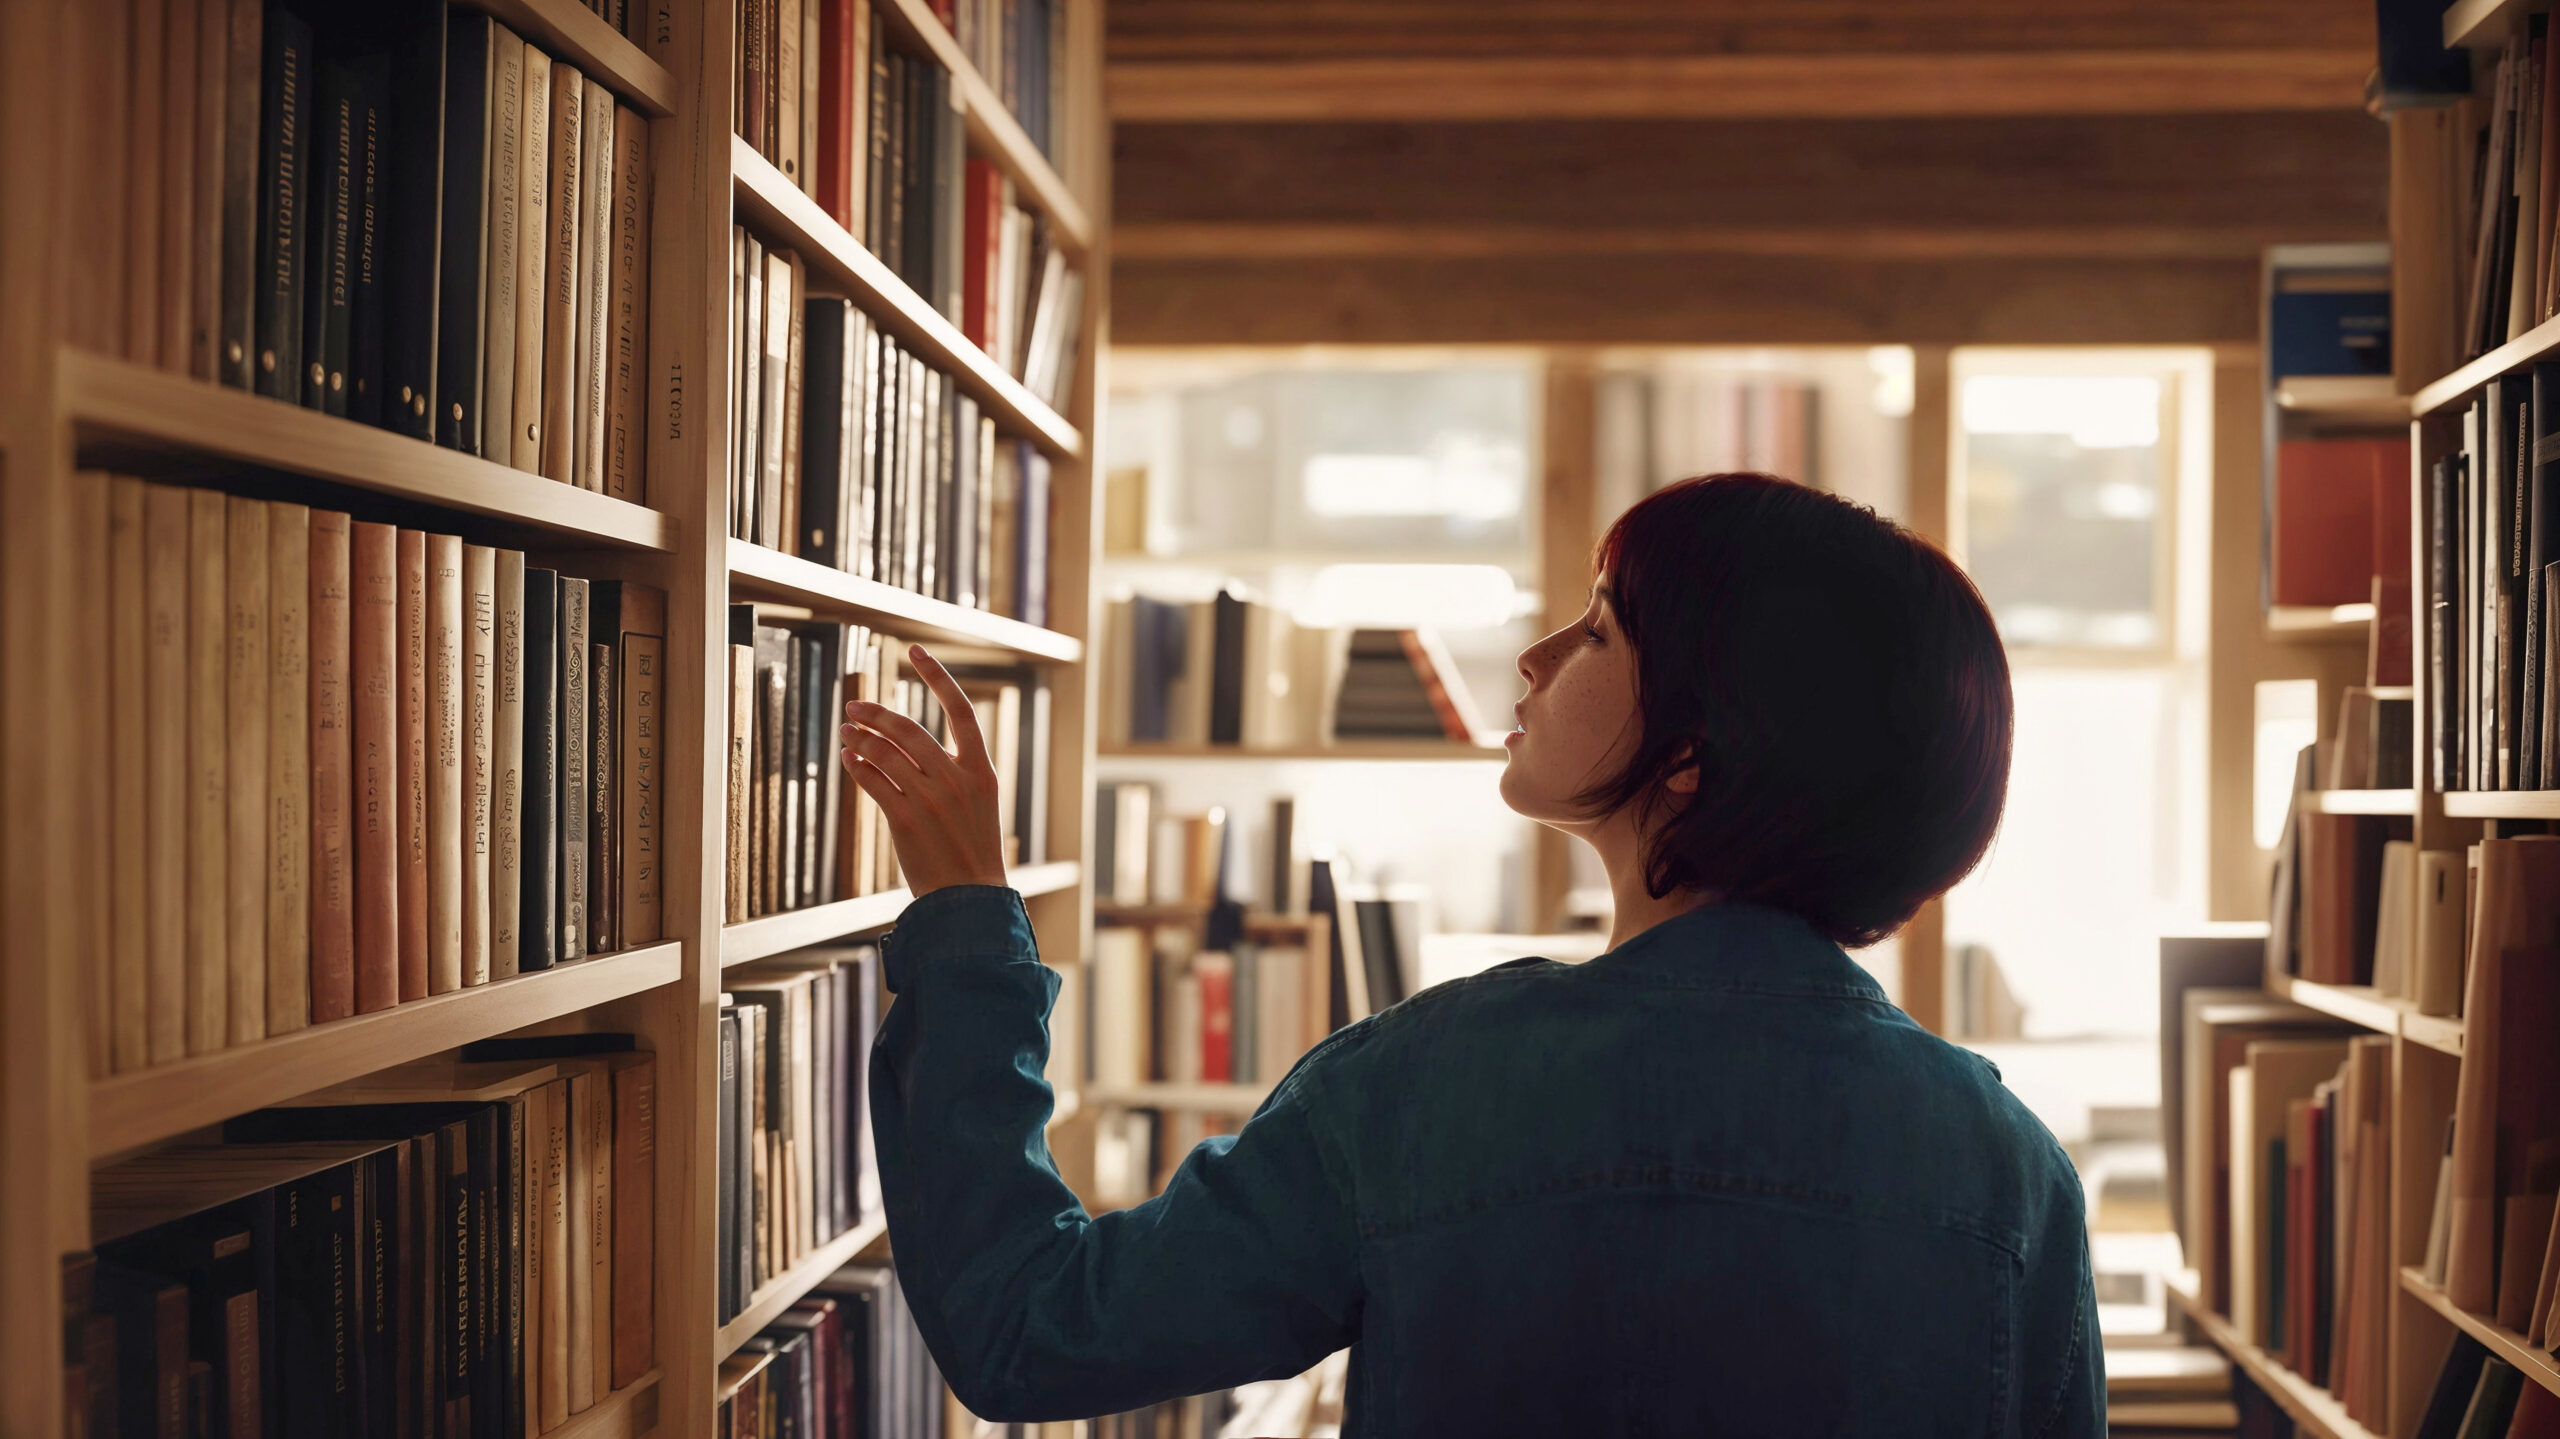 Books on shelves in bookstore, young woman chooses right one, back view